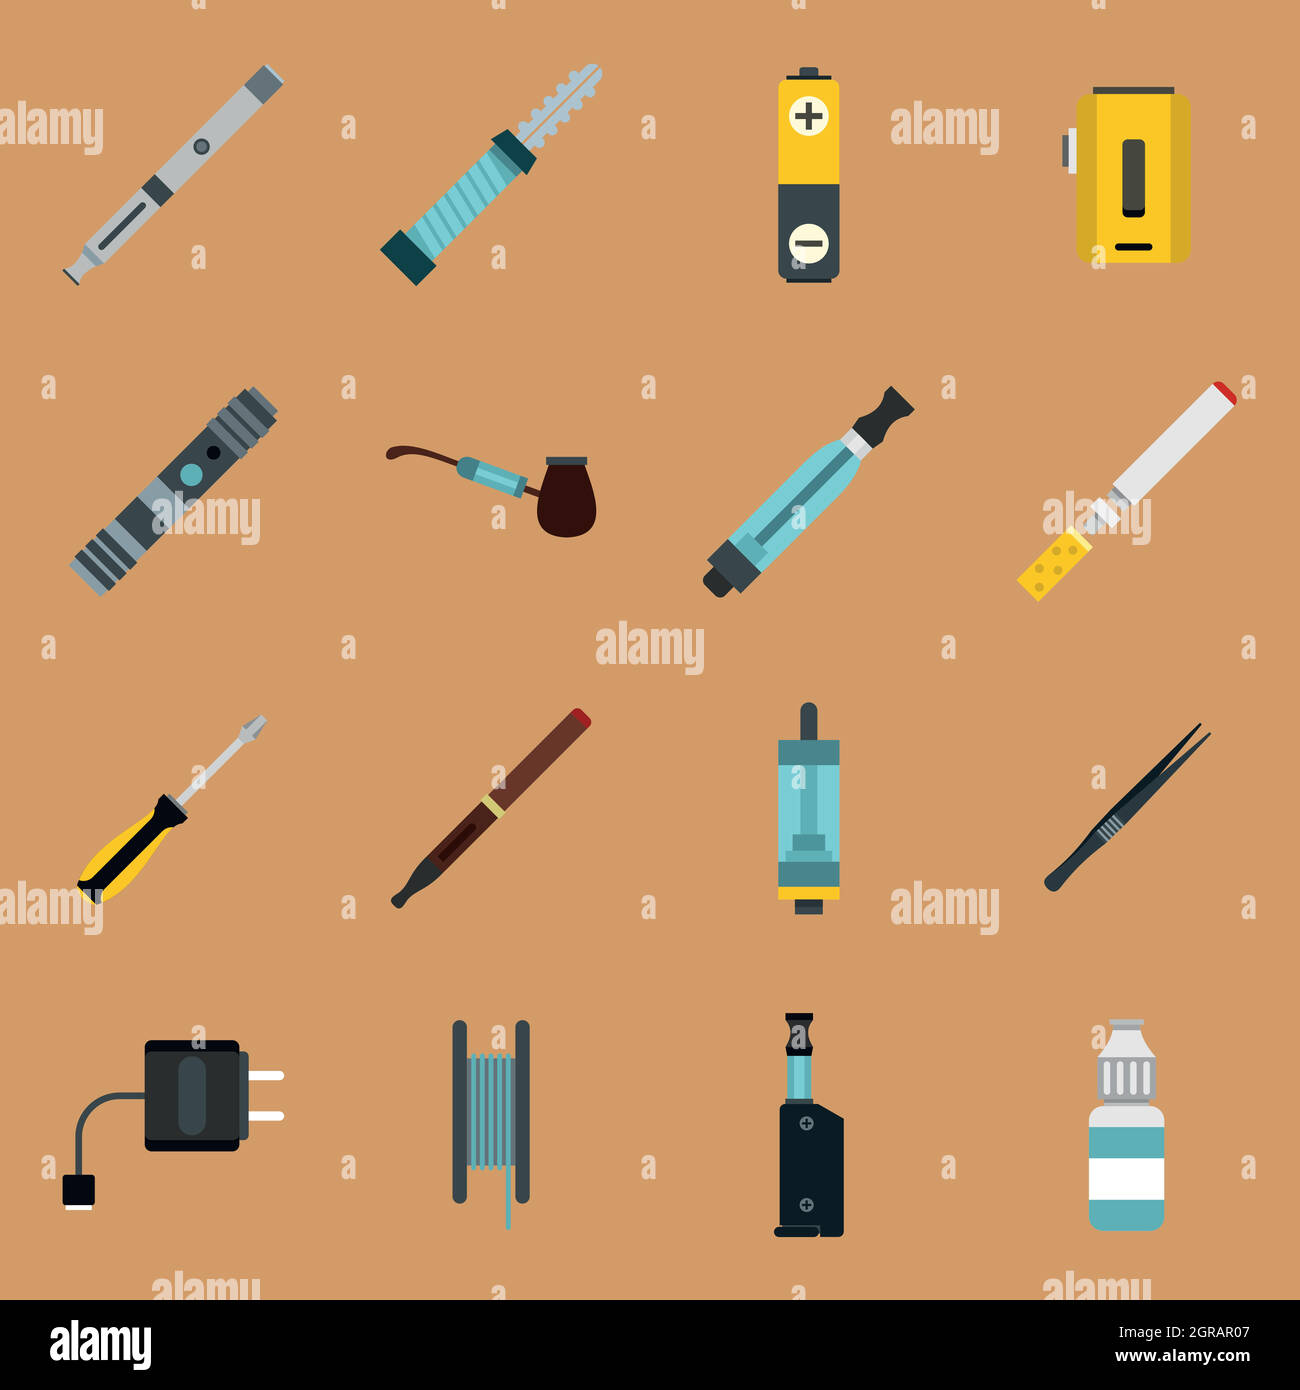 Vaping icons set in flat style Stock Vector